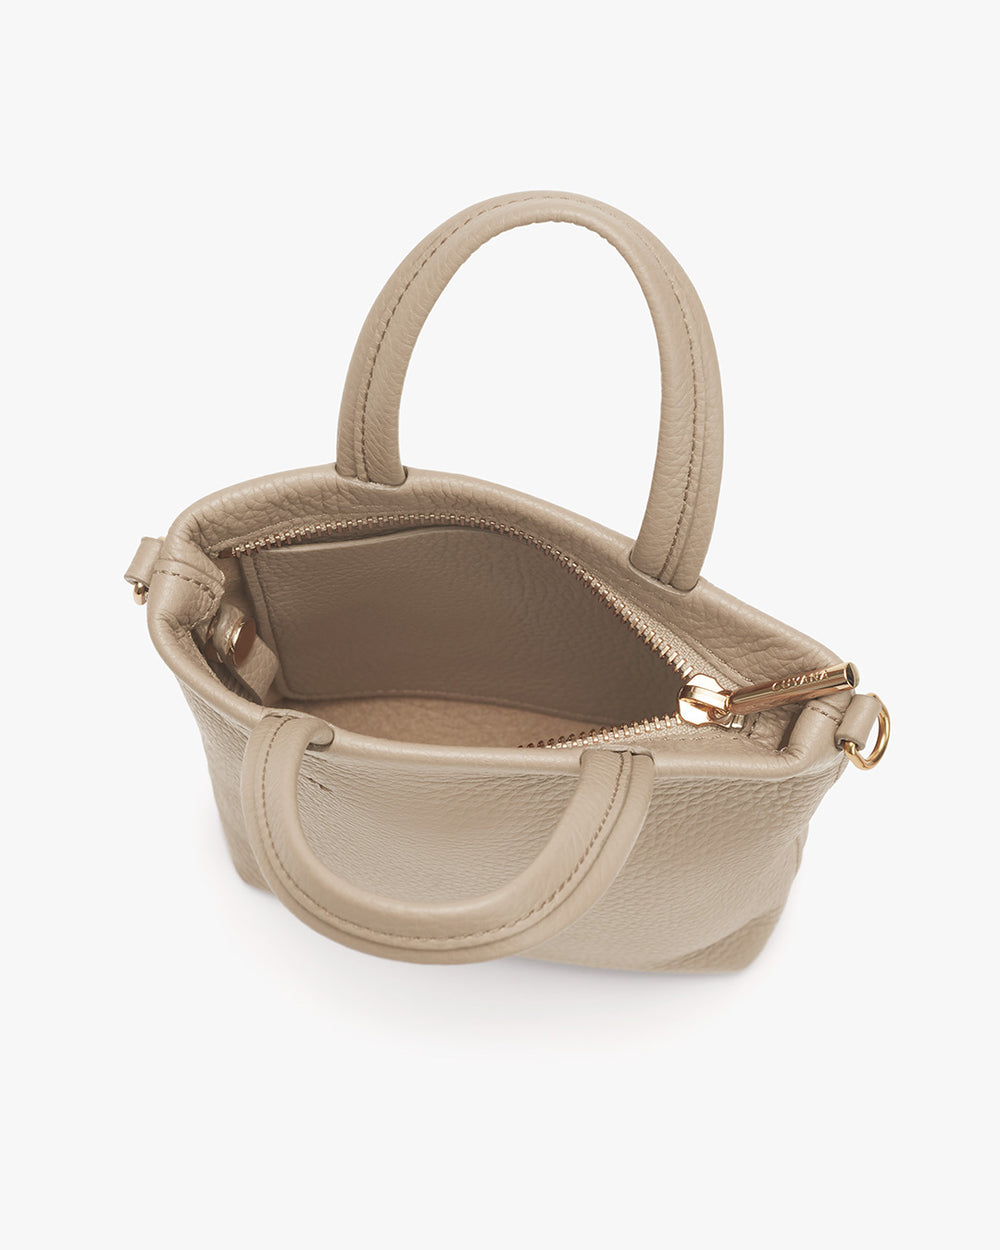 Open handbag with zipper and rounded handles.